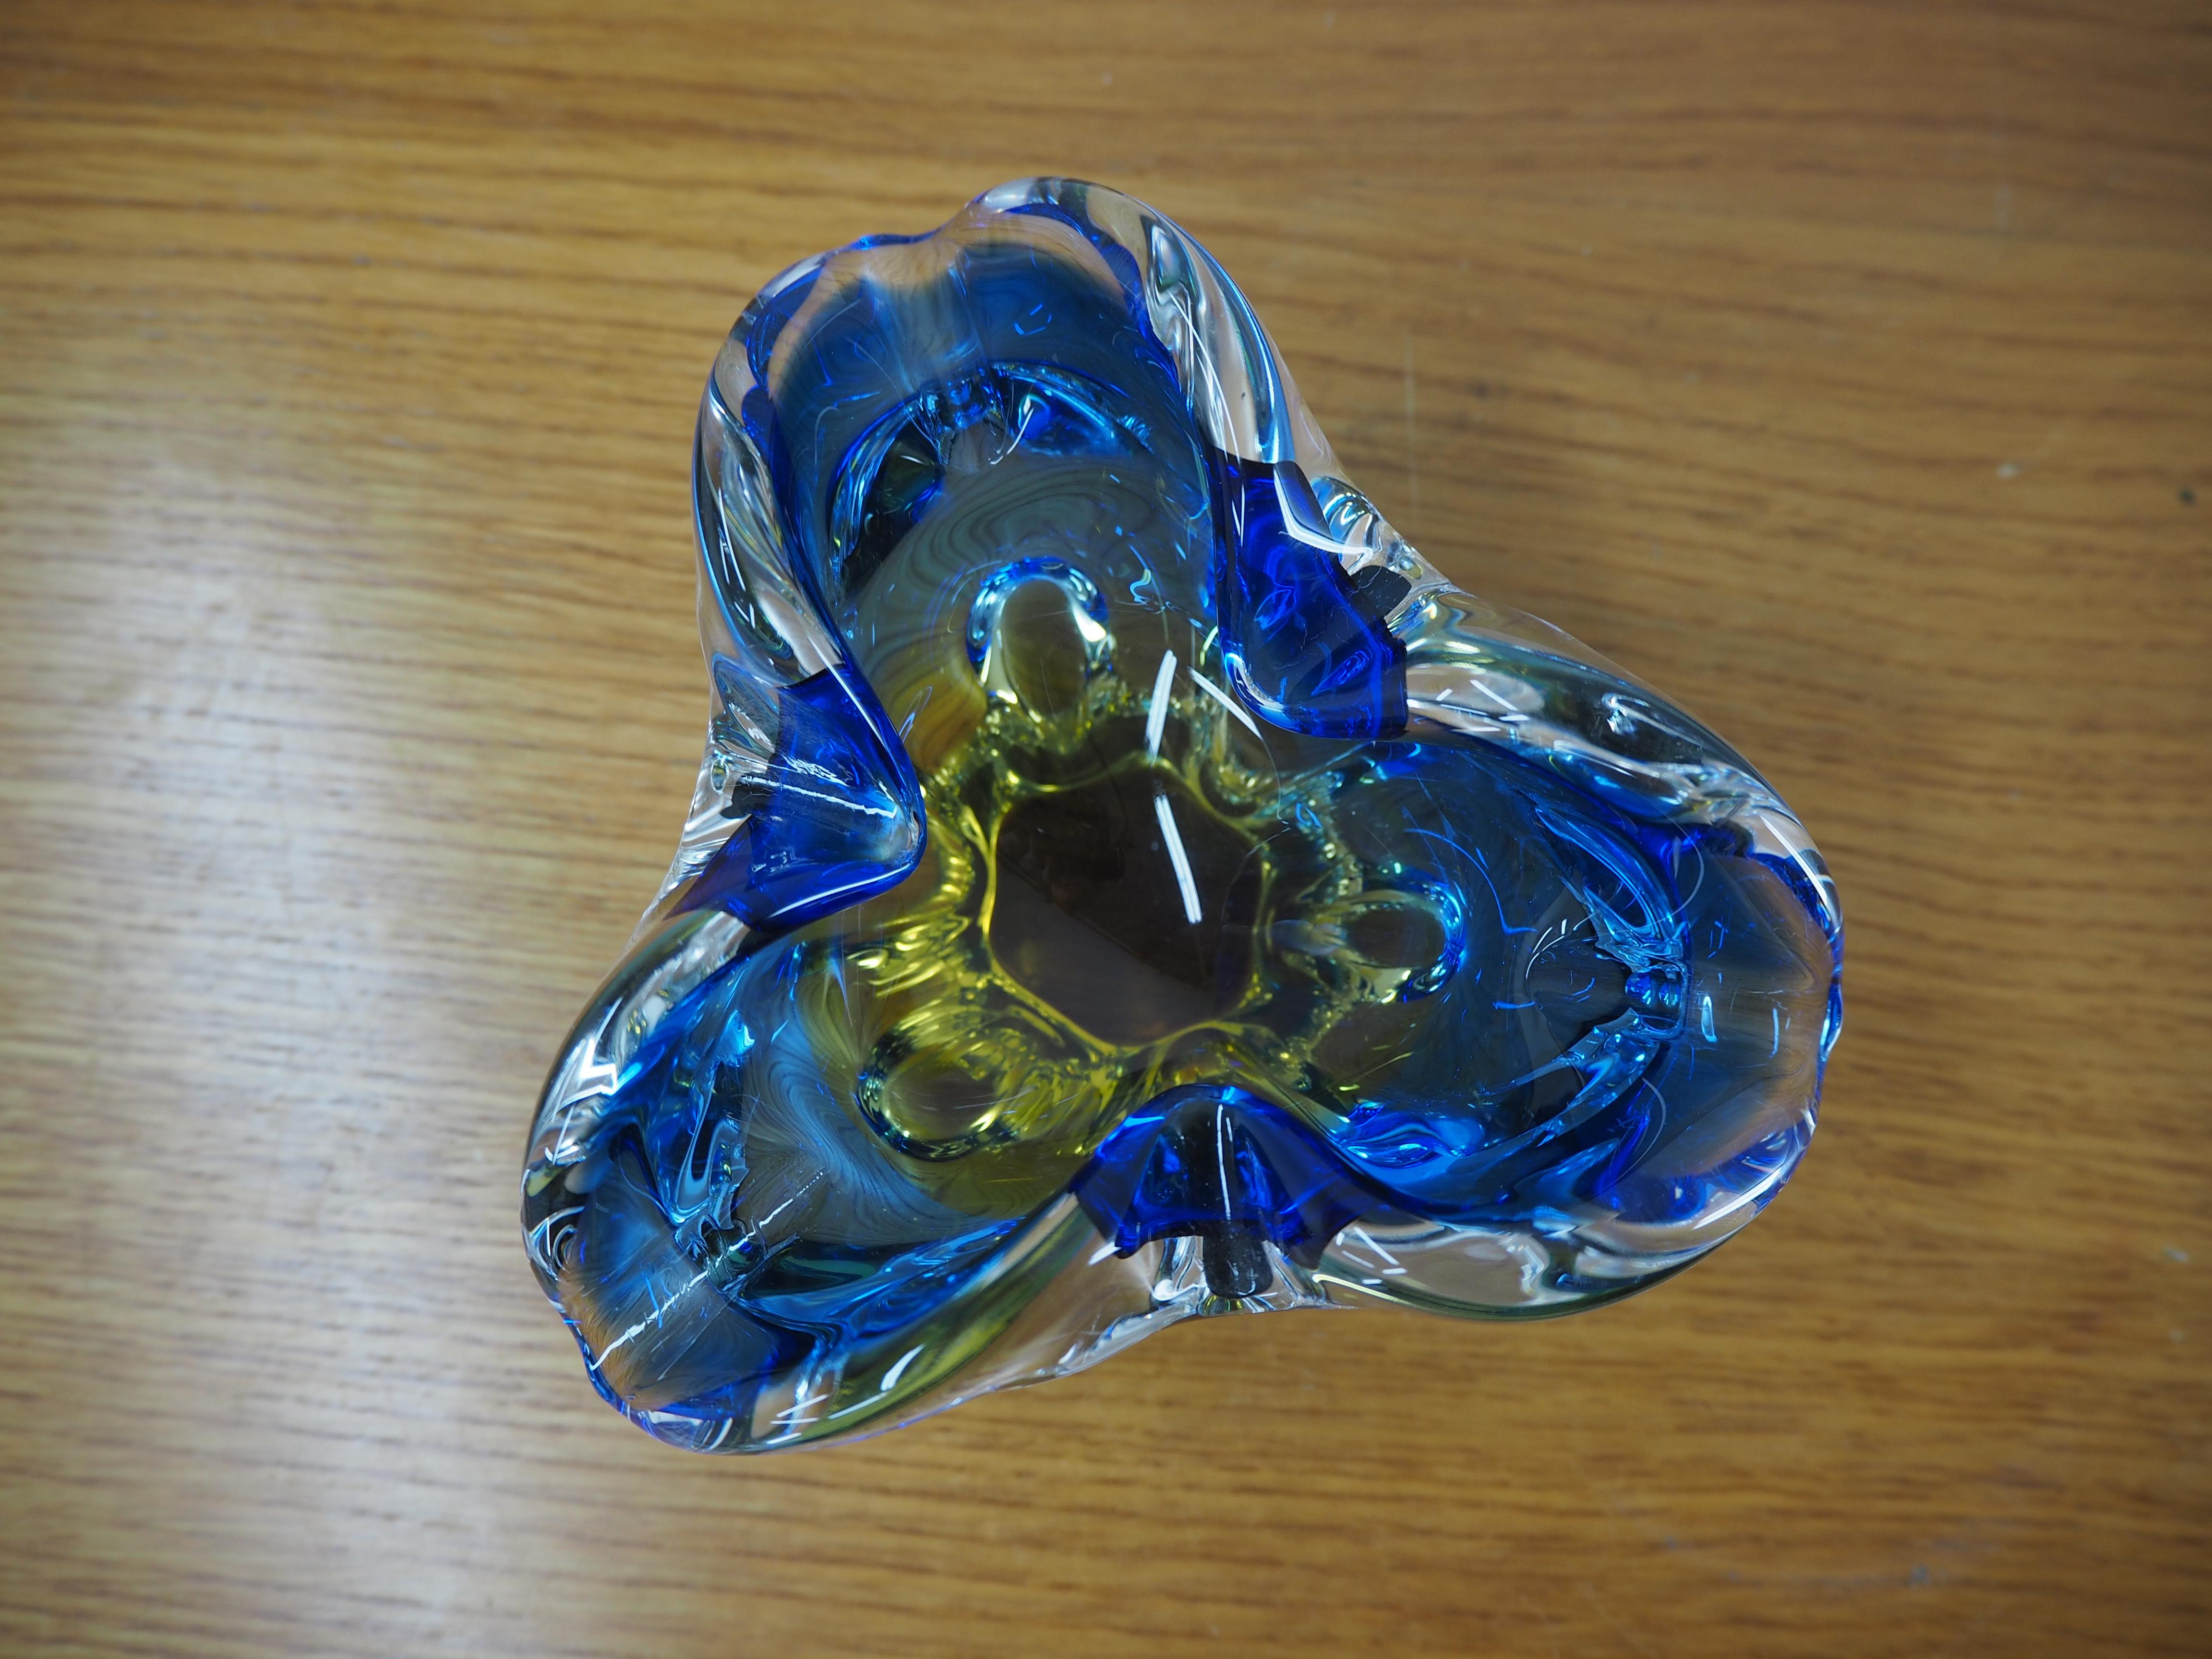 This beautiful bowl or ashtray was designed by Josef Hospodka and made by the Chribska Glassworks.